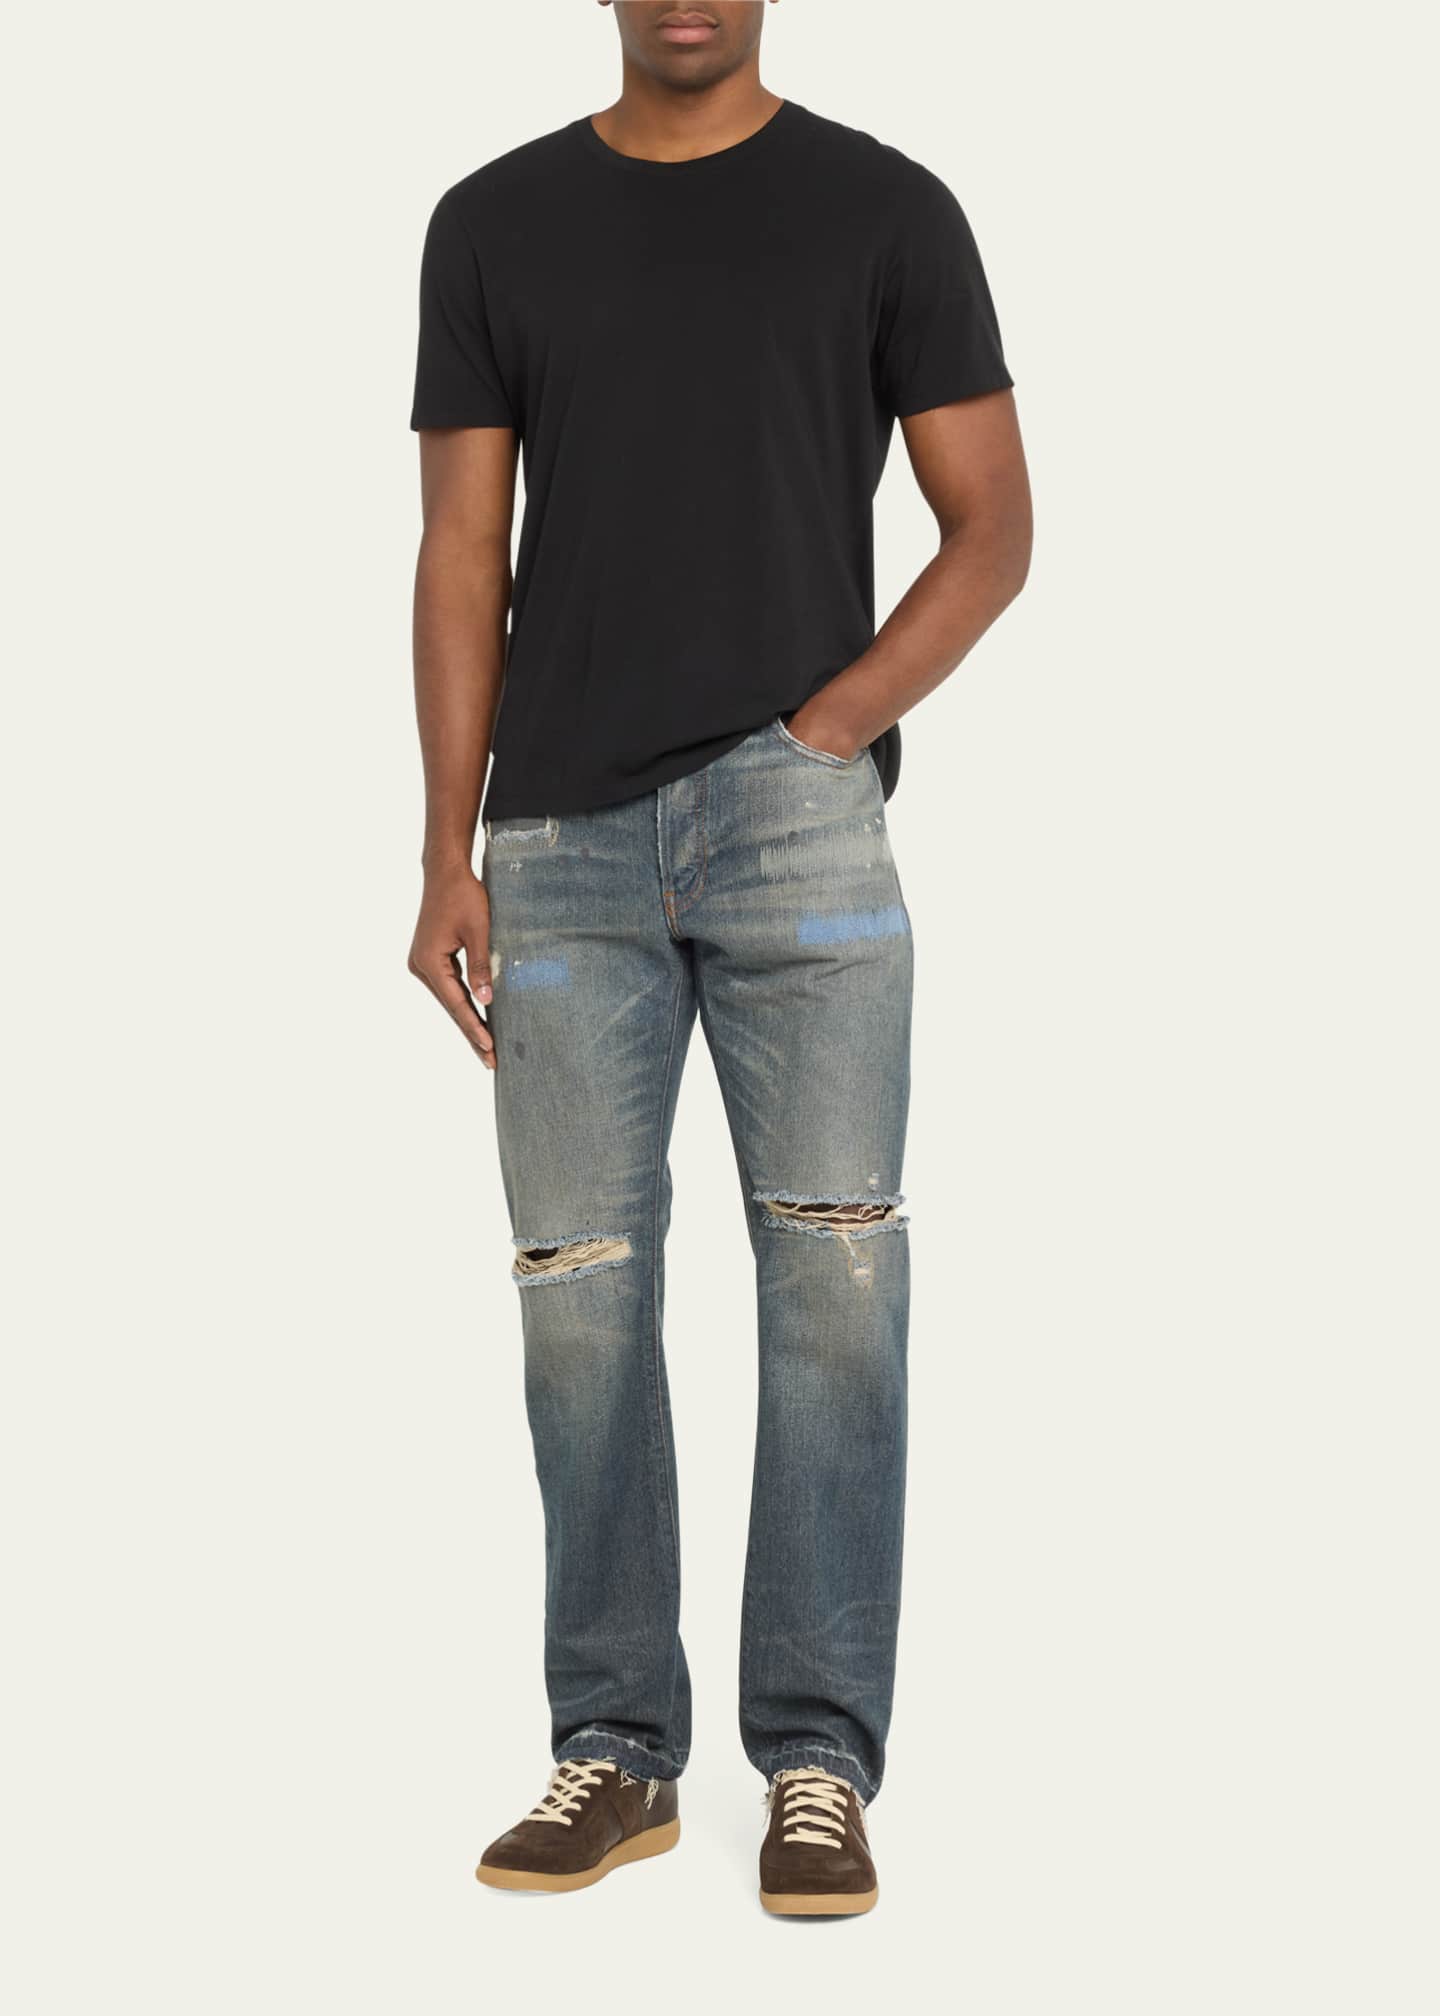 GALLERY DEPARTMENT Men's STARR 5001 Distressed Jeans